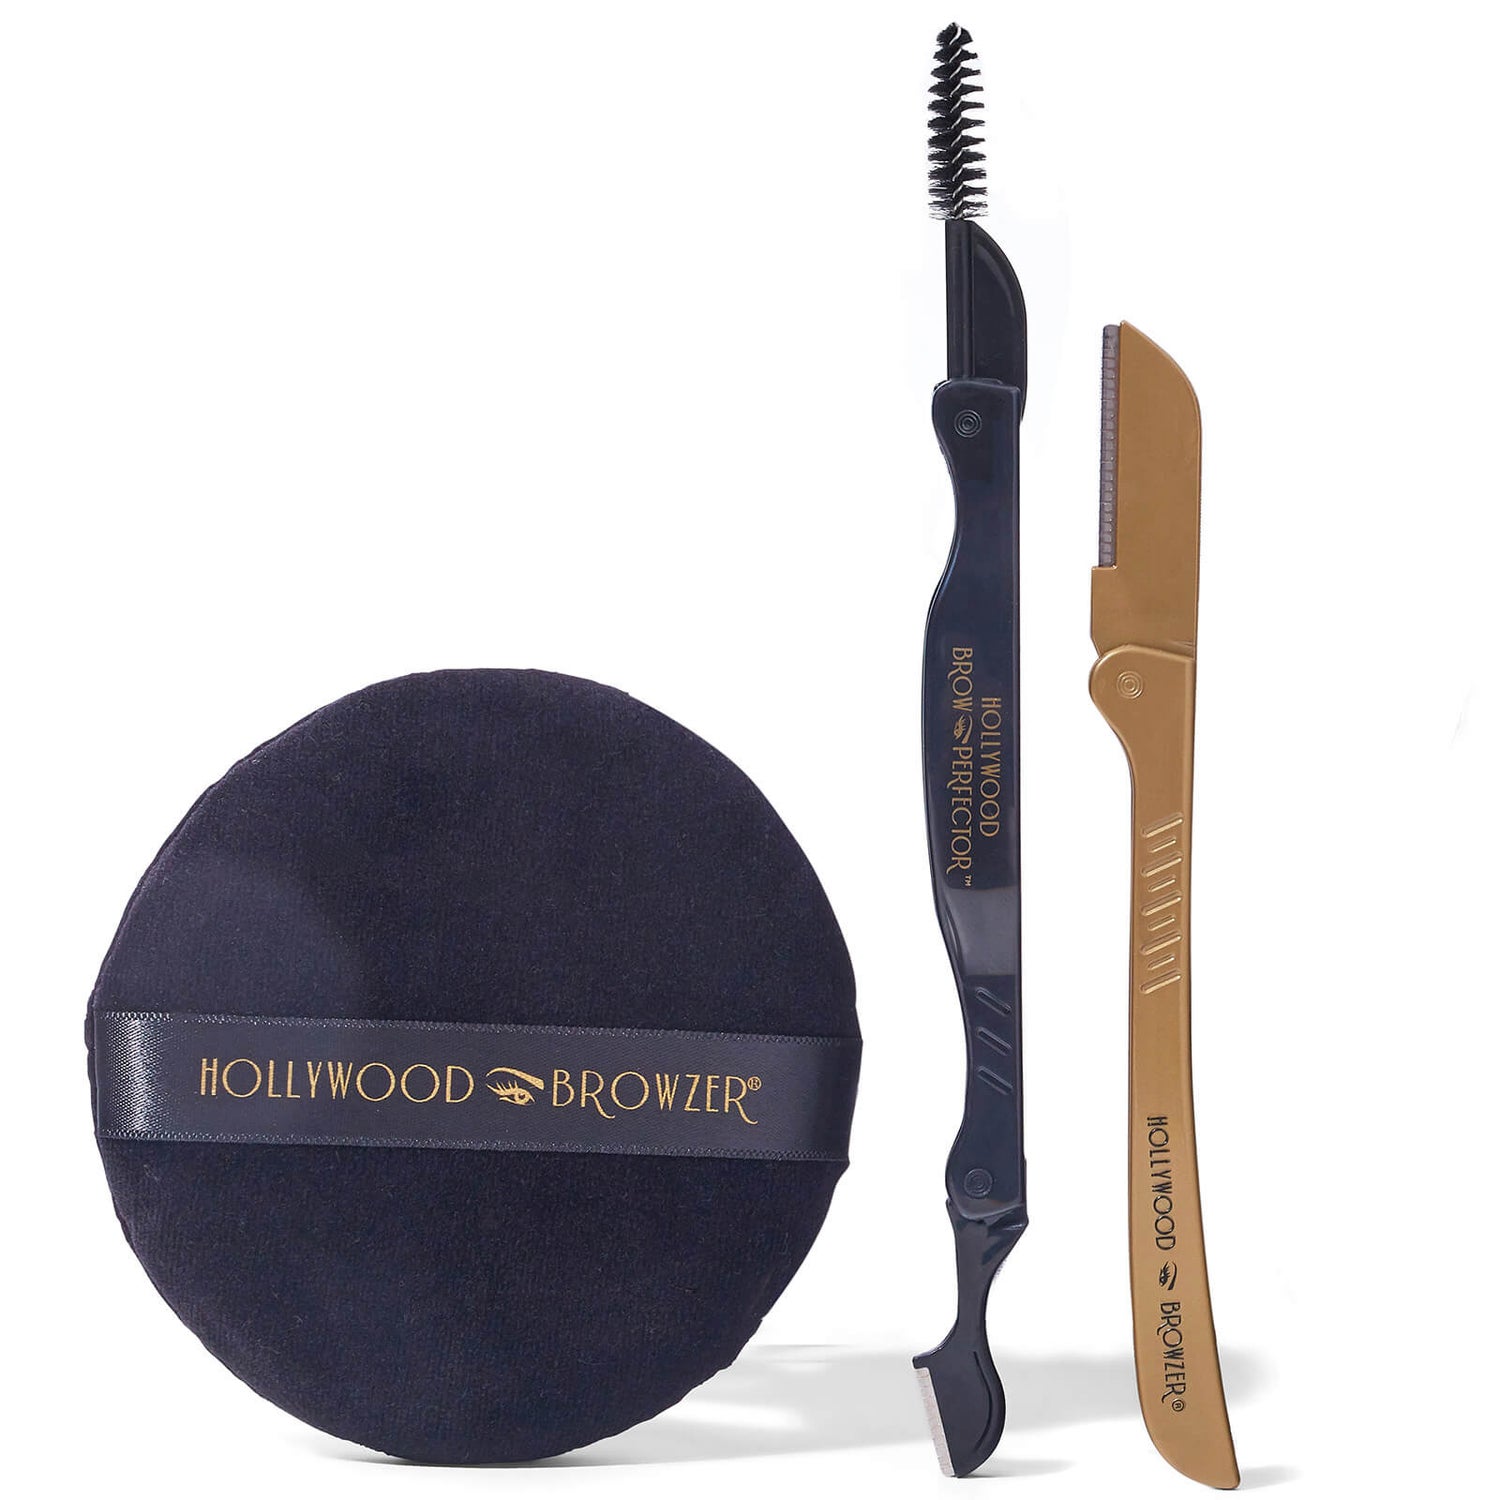 Hollywood Browzer Brow Shaping and Dermaplaning Kit